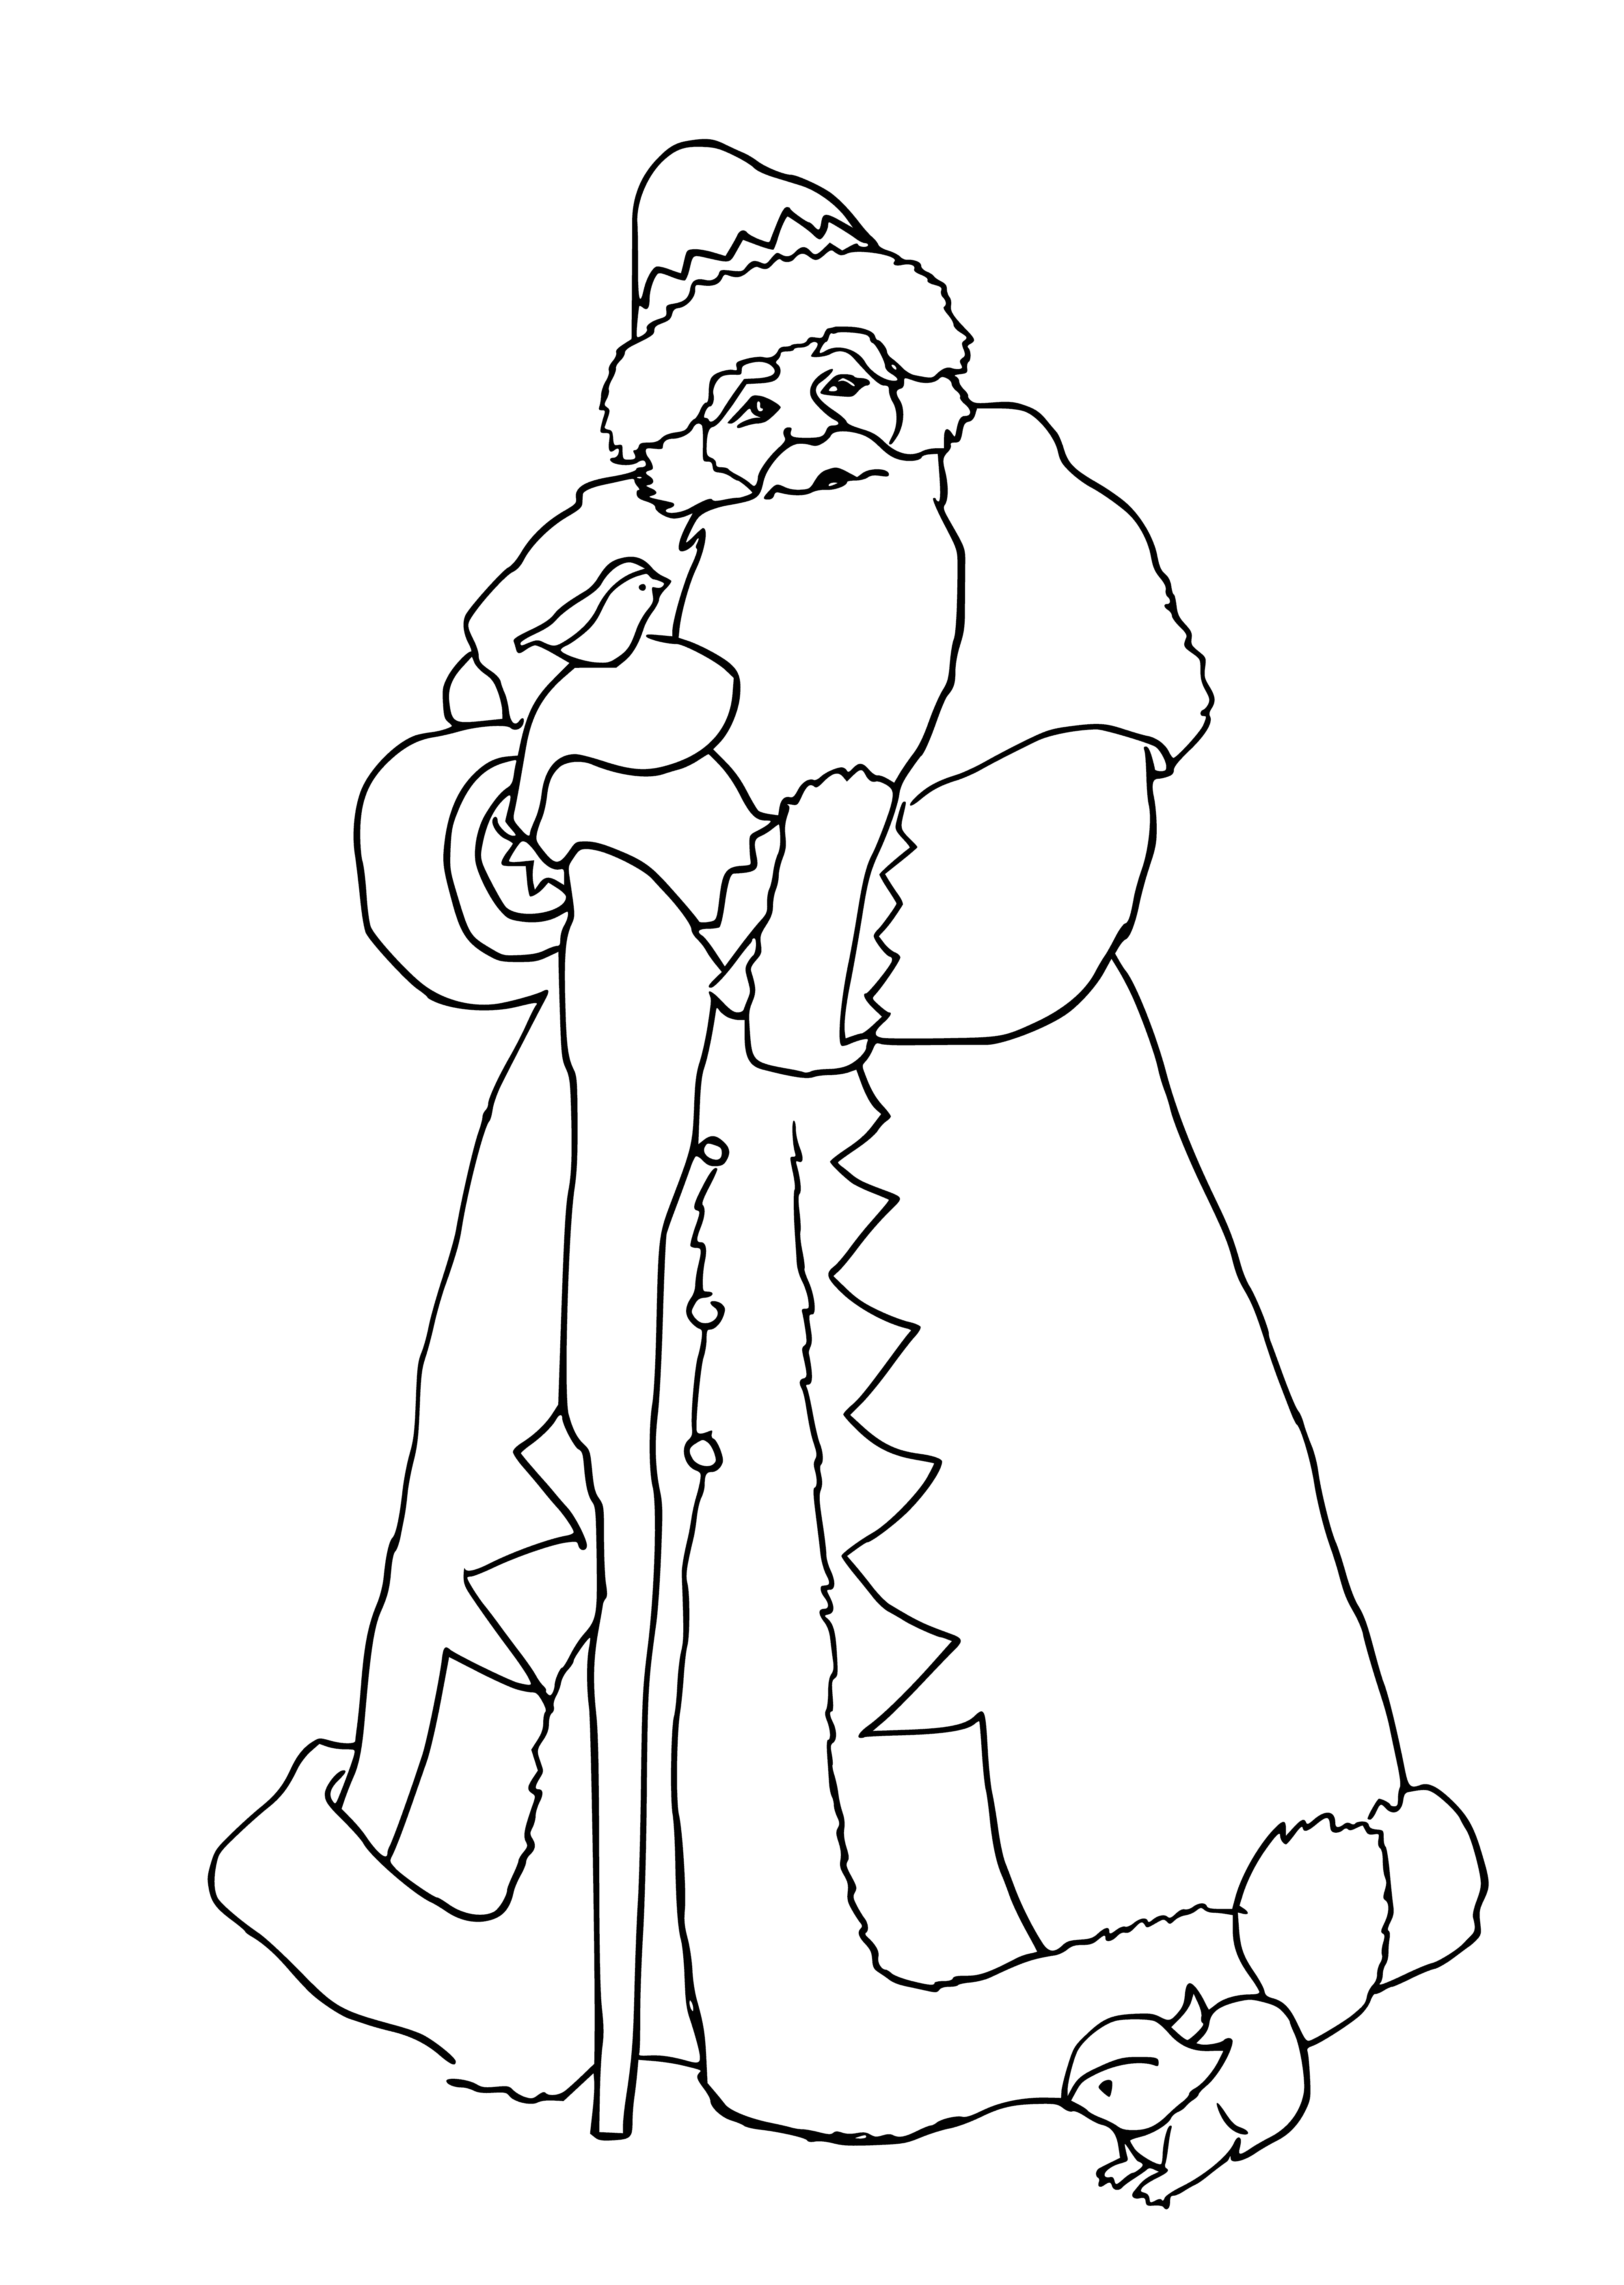 coloring page: Santa Clause holding presents and candy cane, ready for Christmas giving!